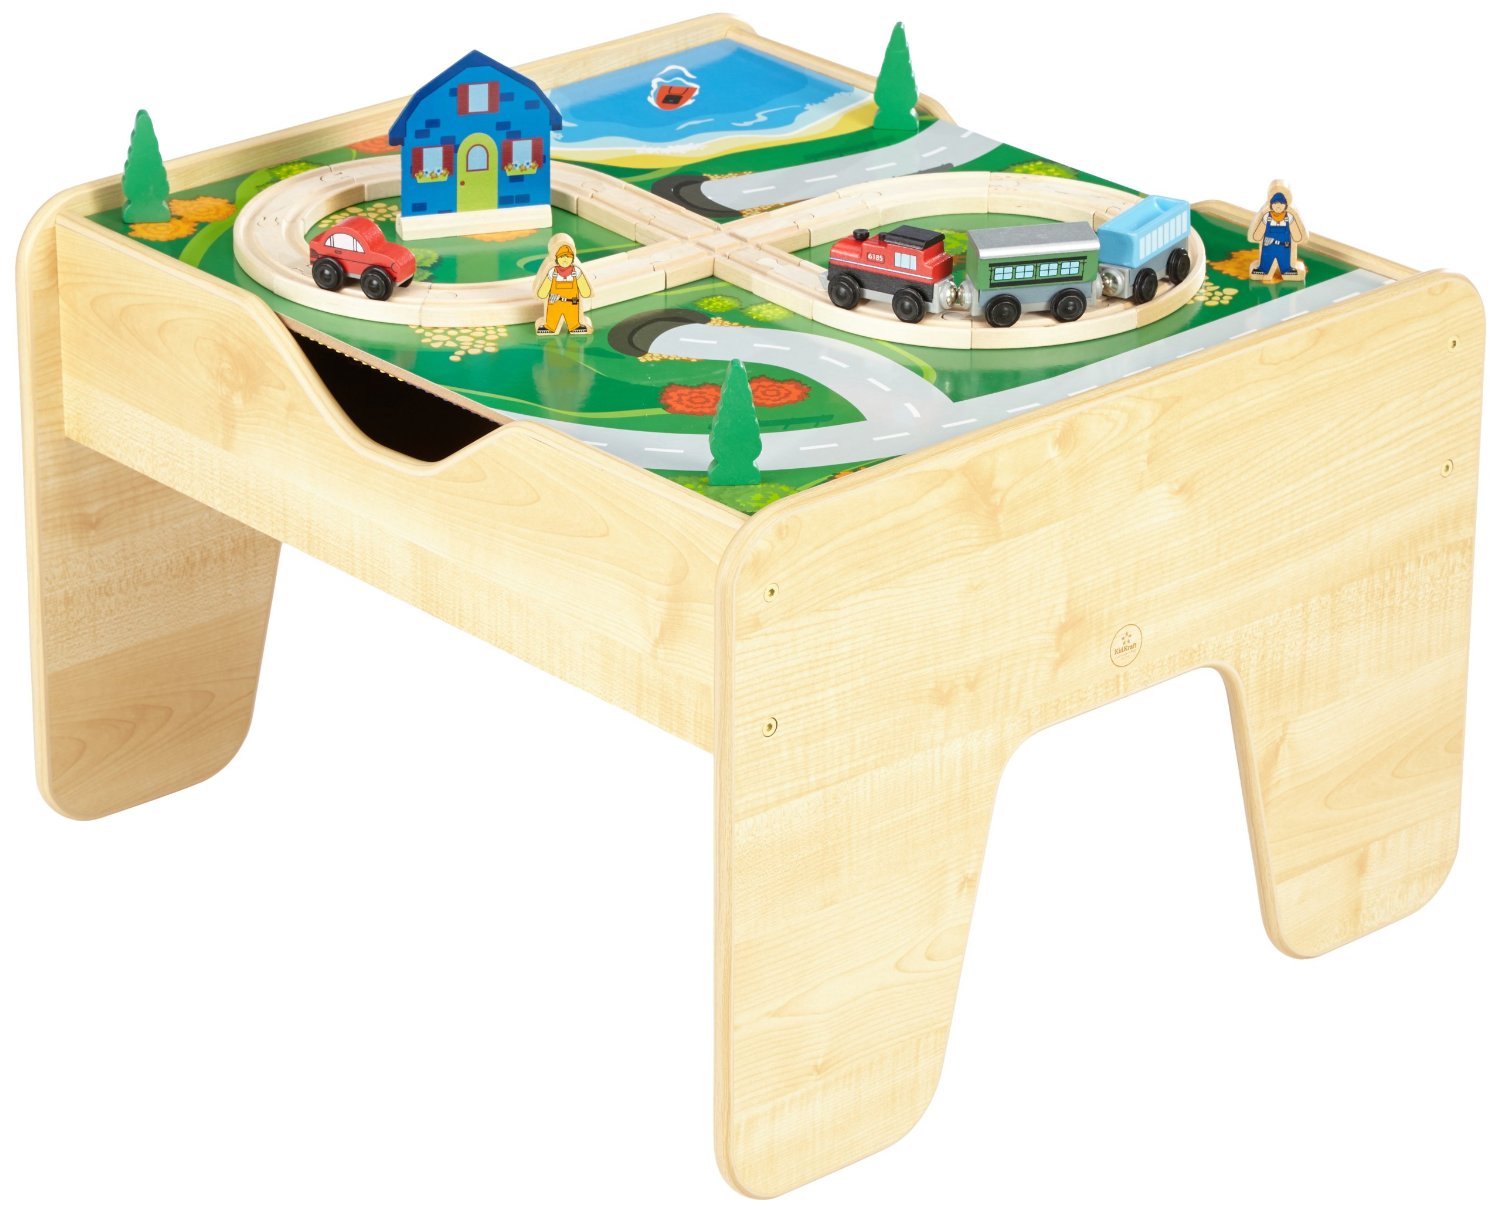 KidKraft Lego Compatible 2 in 1 Activity Table – Just $49.99!